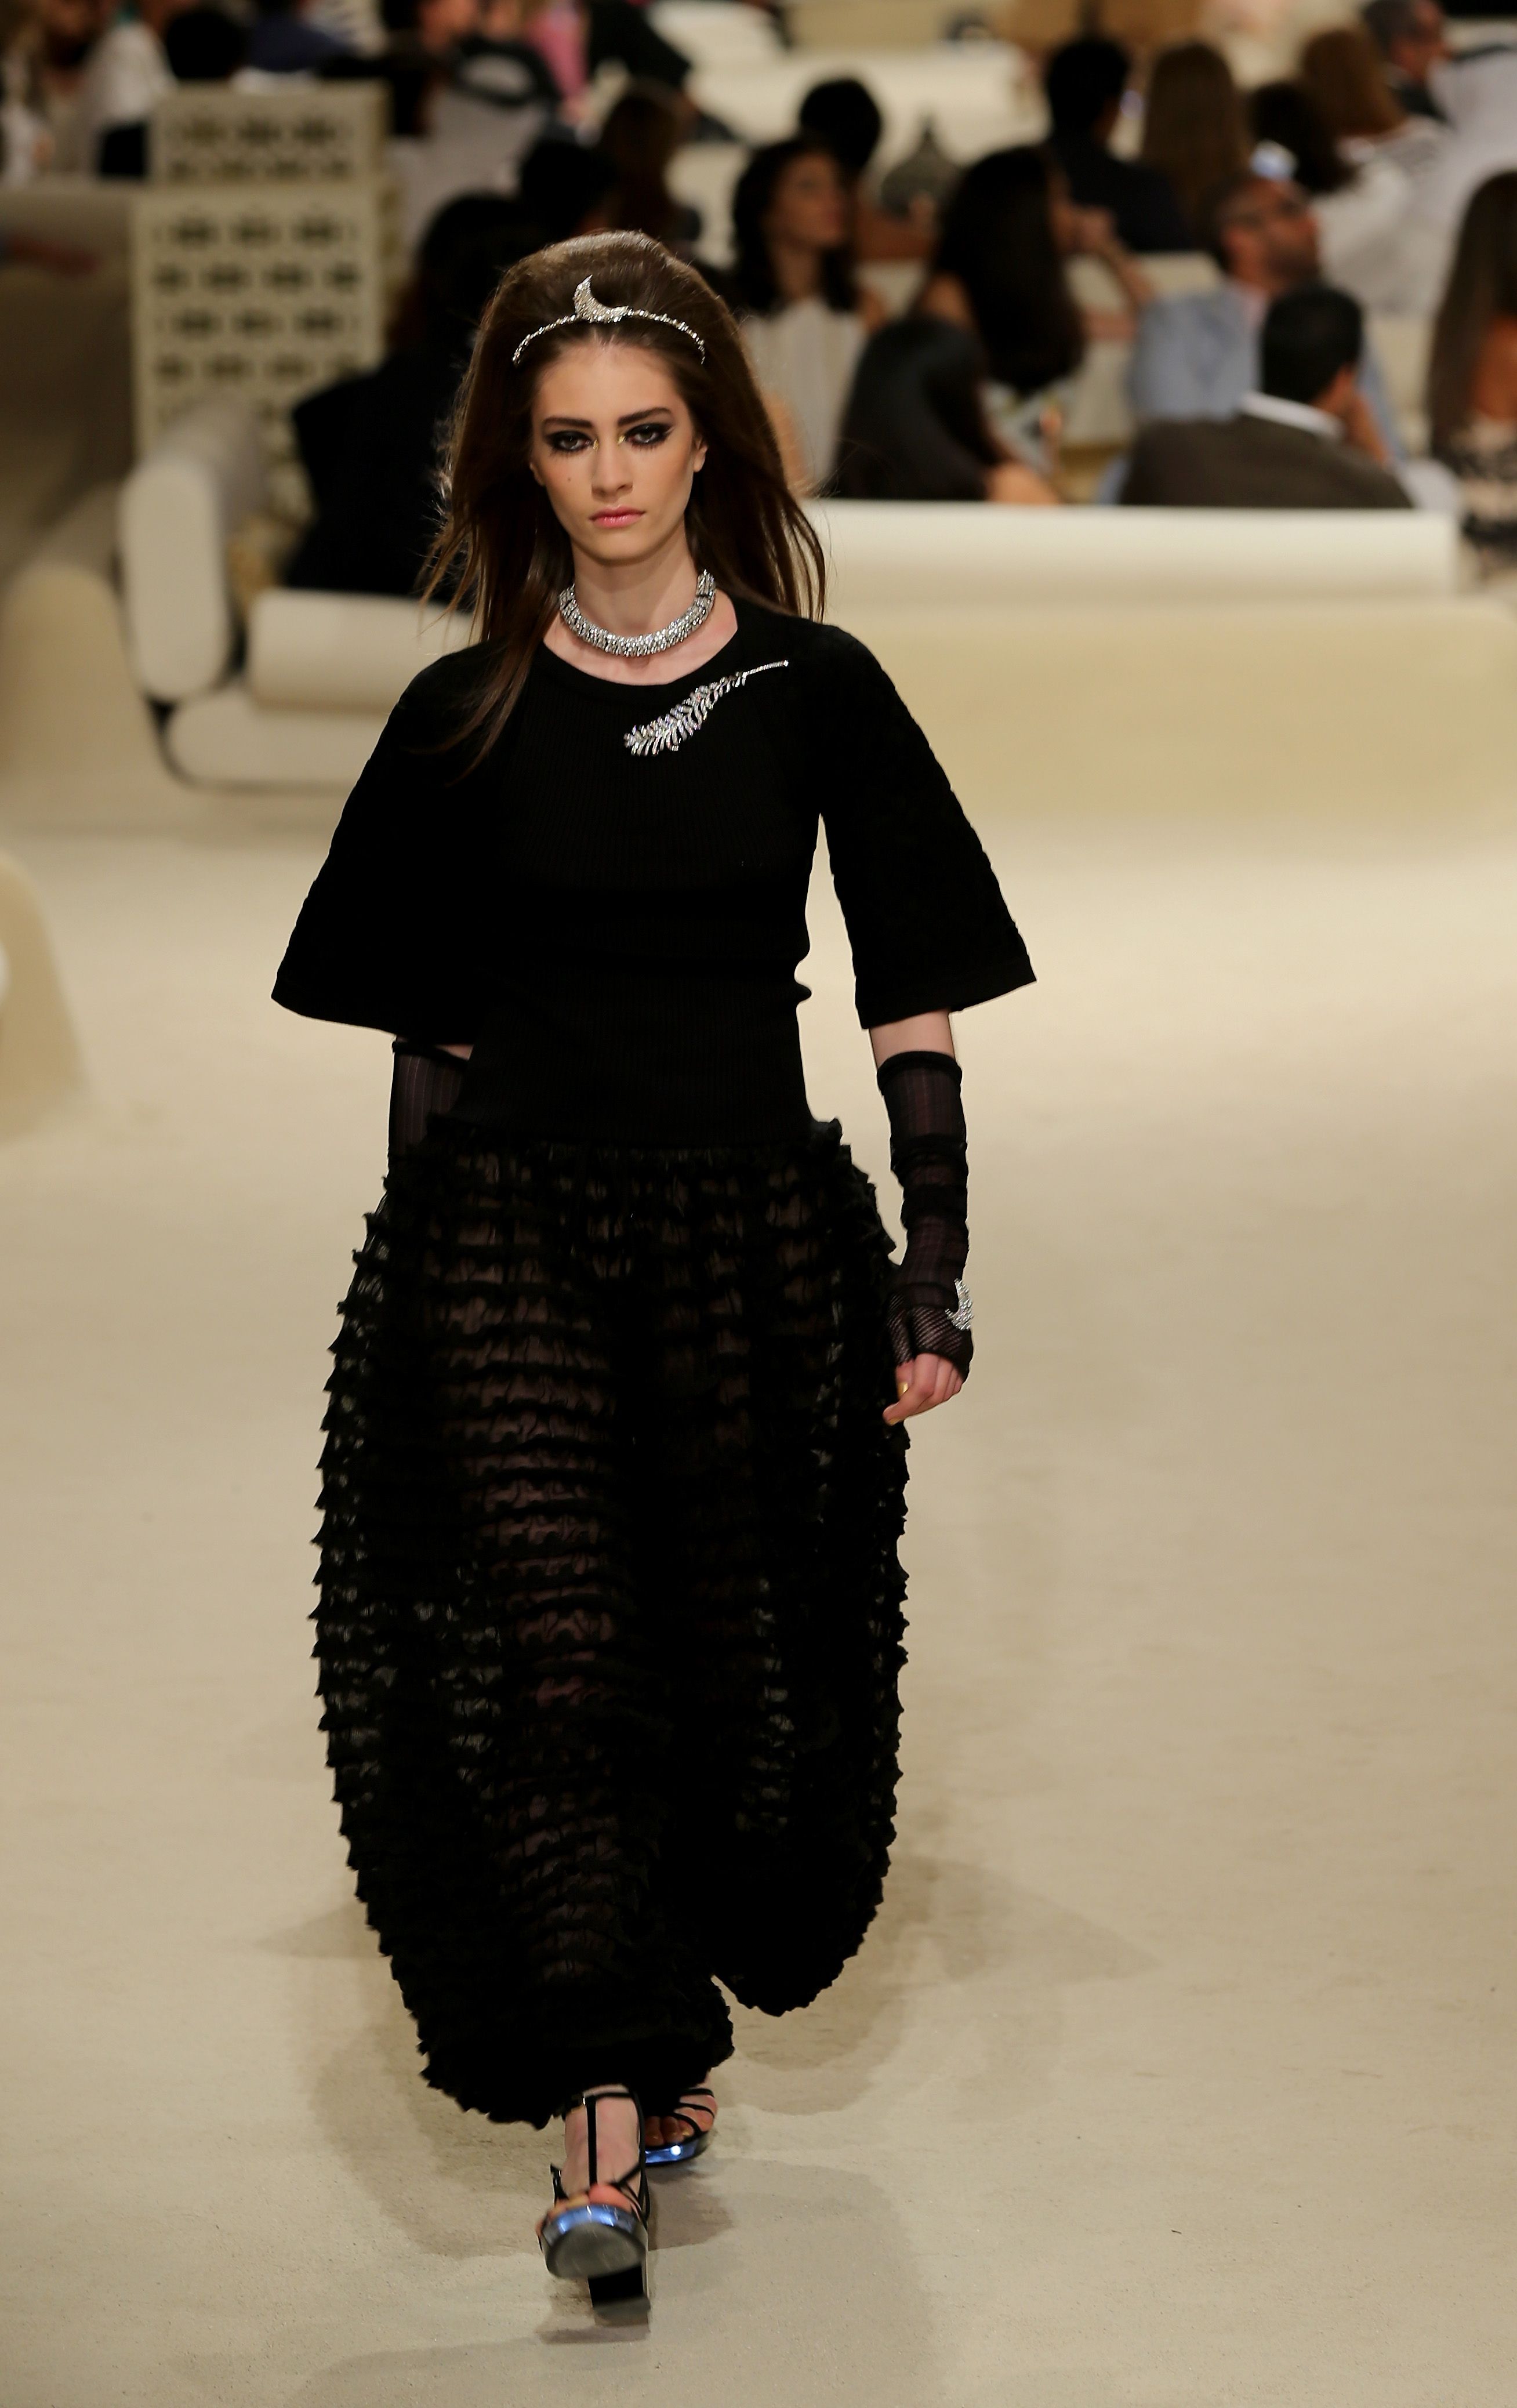 Karl Lagerfeld hosts Chanel's Cruise Collection in Dubai